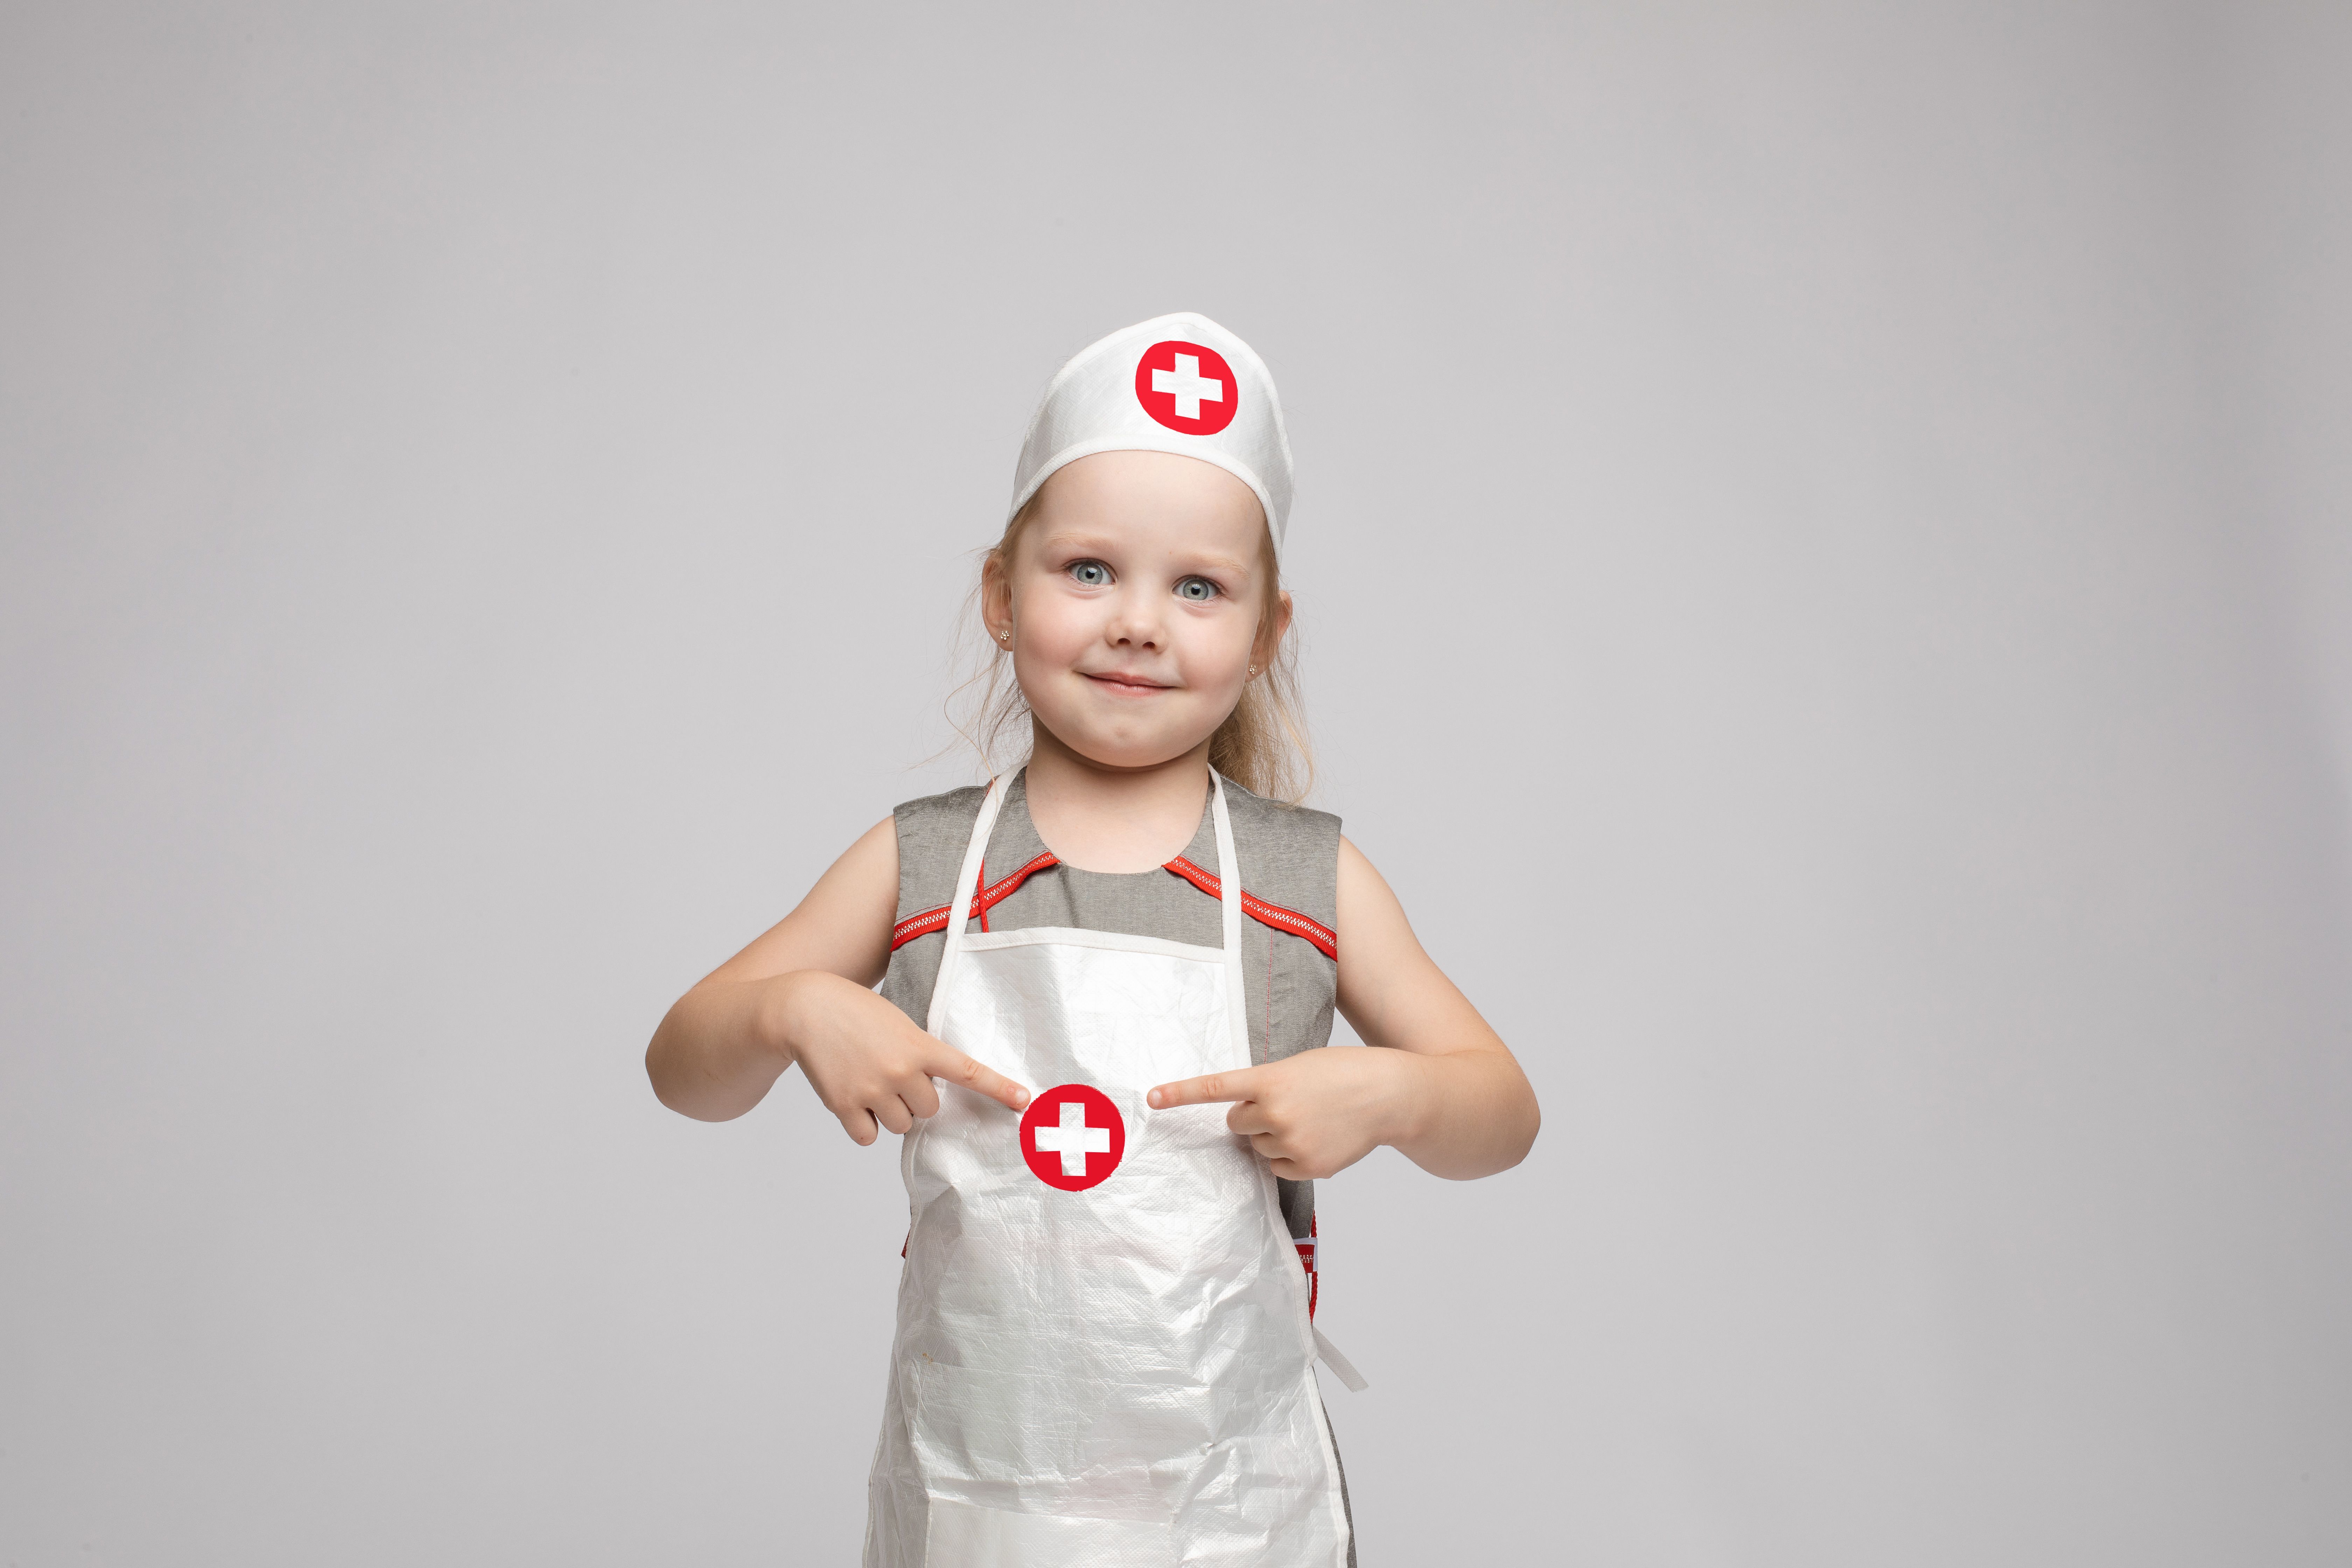 Children Should Play a Role in Sudden Cardiac Arrest Response: Here’s Why